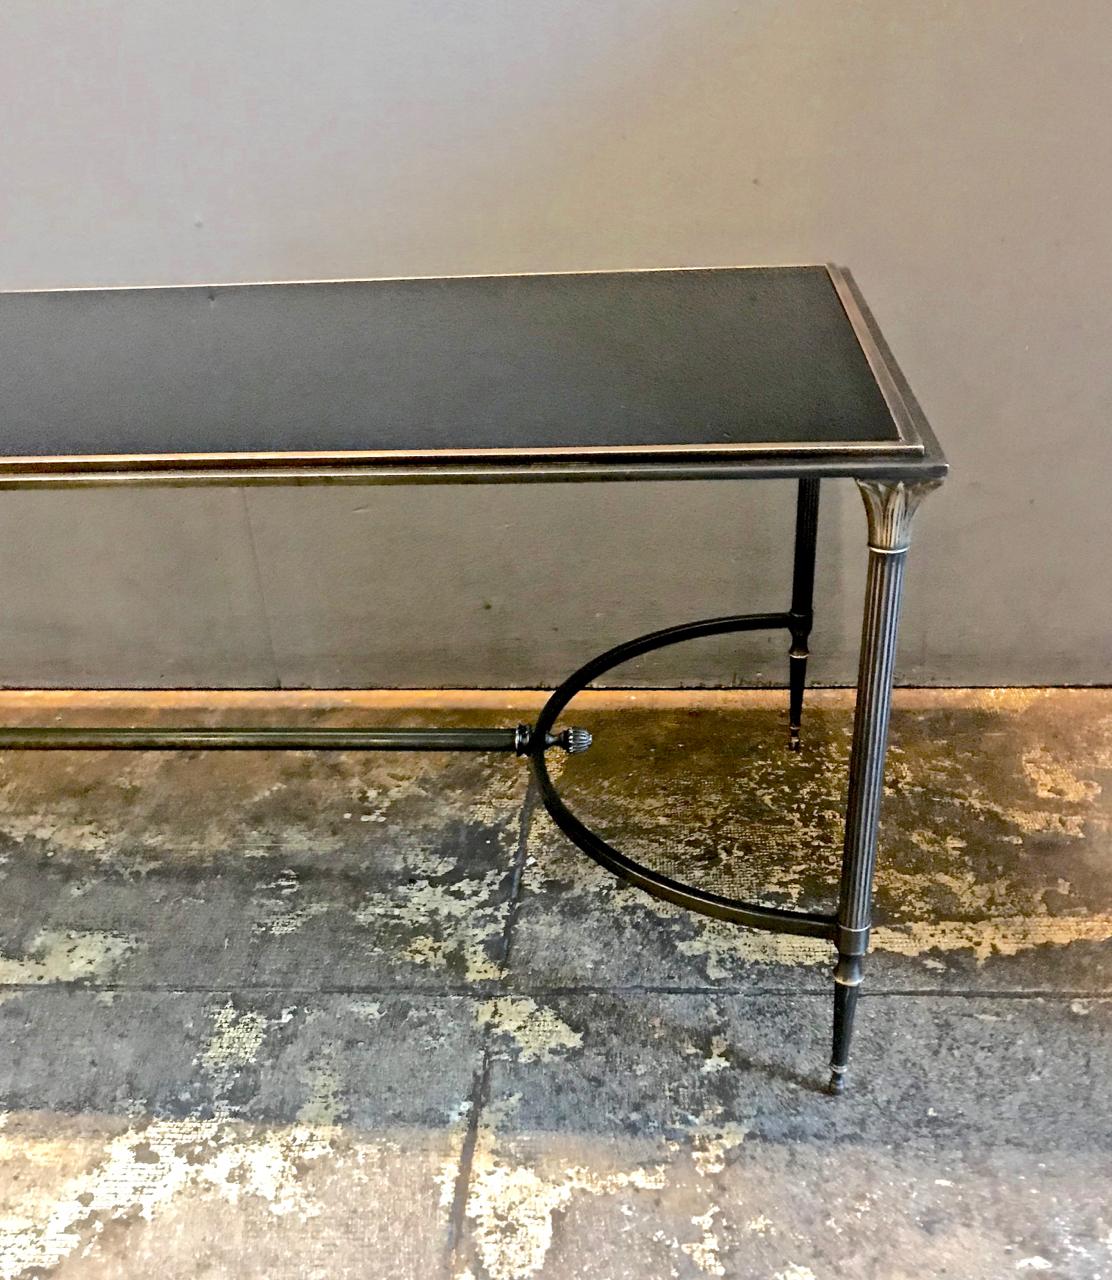 Maison Baguès Bronze and Glass Coffee Table im Zustand „Gut“ in Pasadena, CA